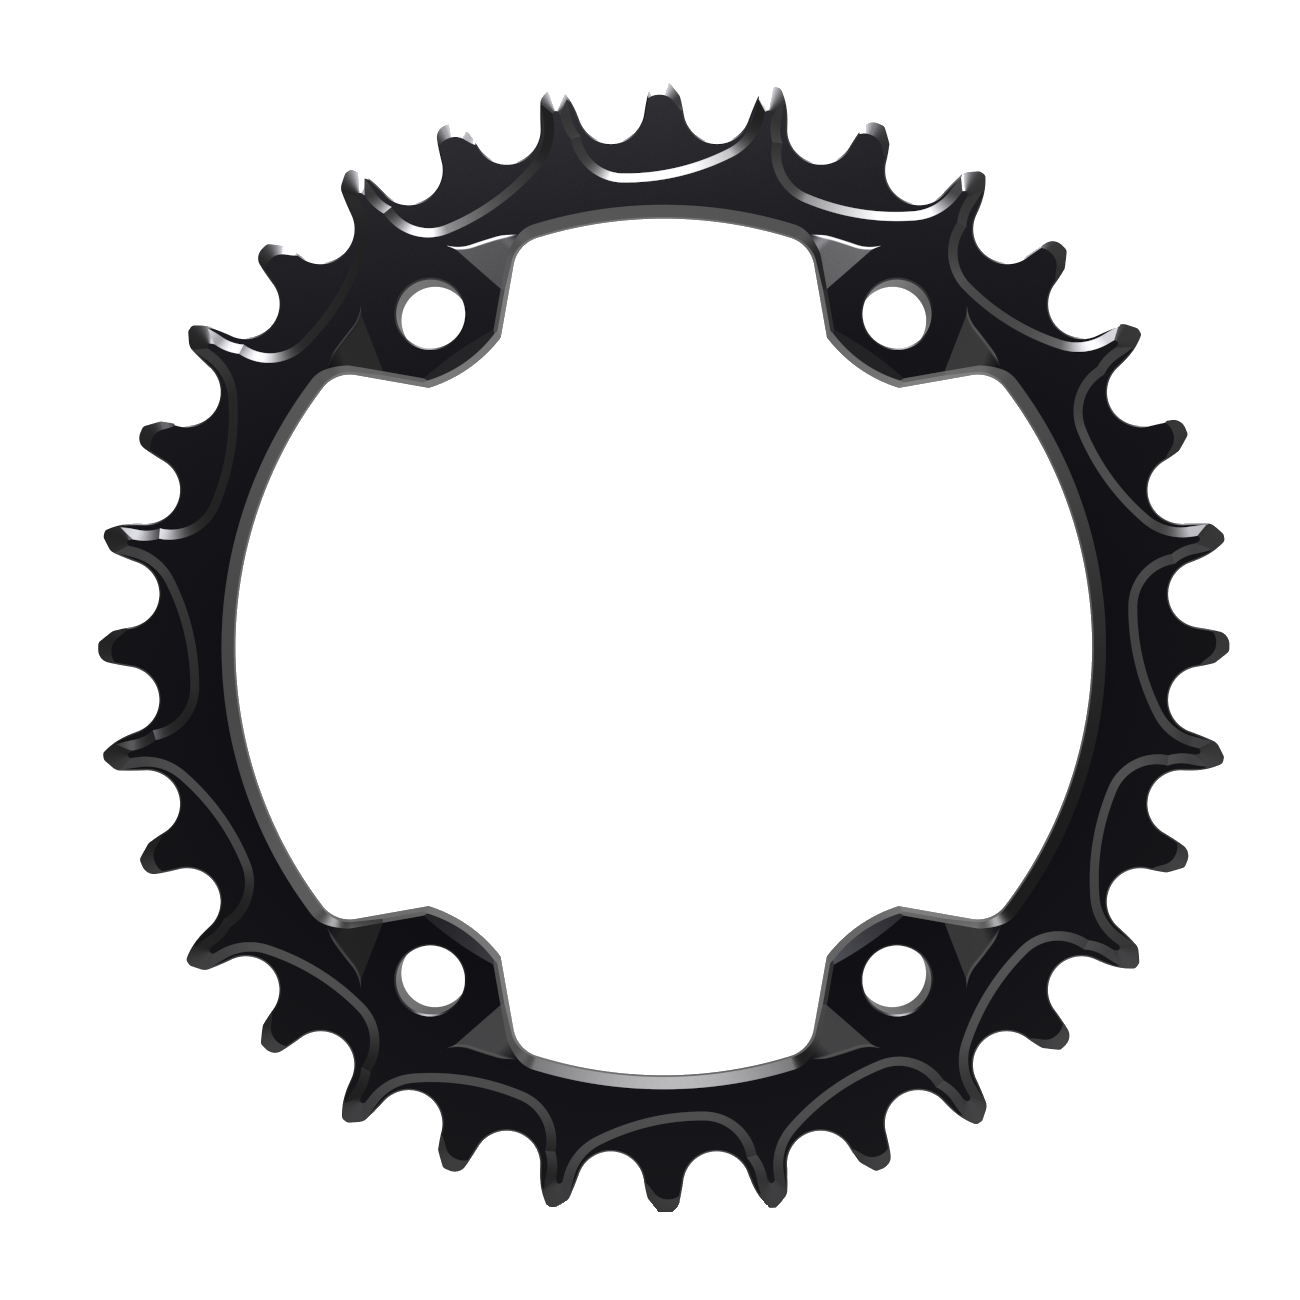 Picture of Alugear Narrow Wide MTB Chainring - for Shimano 96 BCD Asymmetric - 4-Bolt